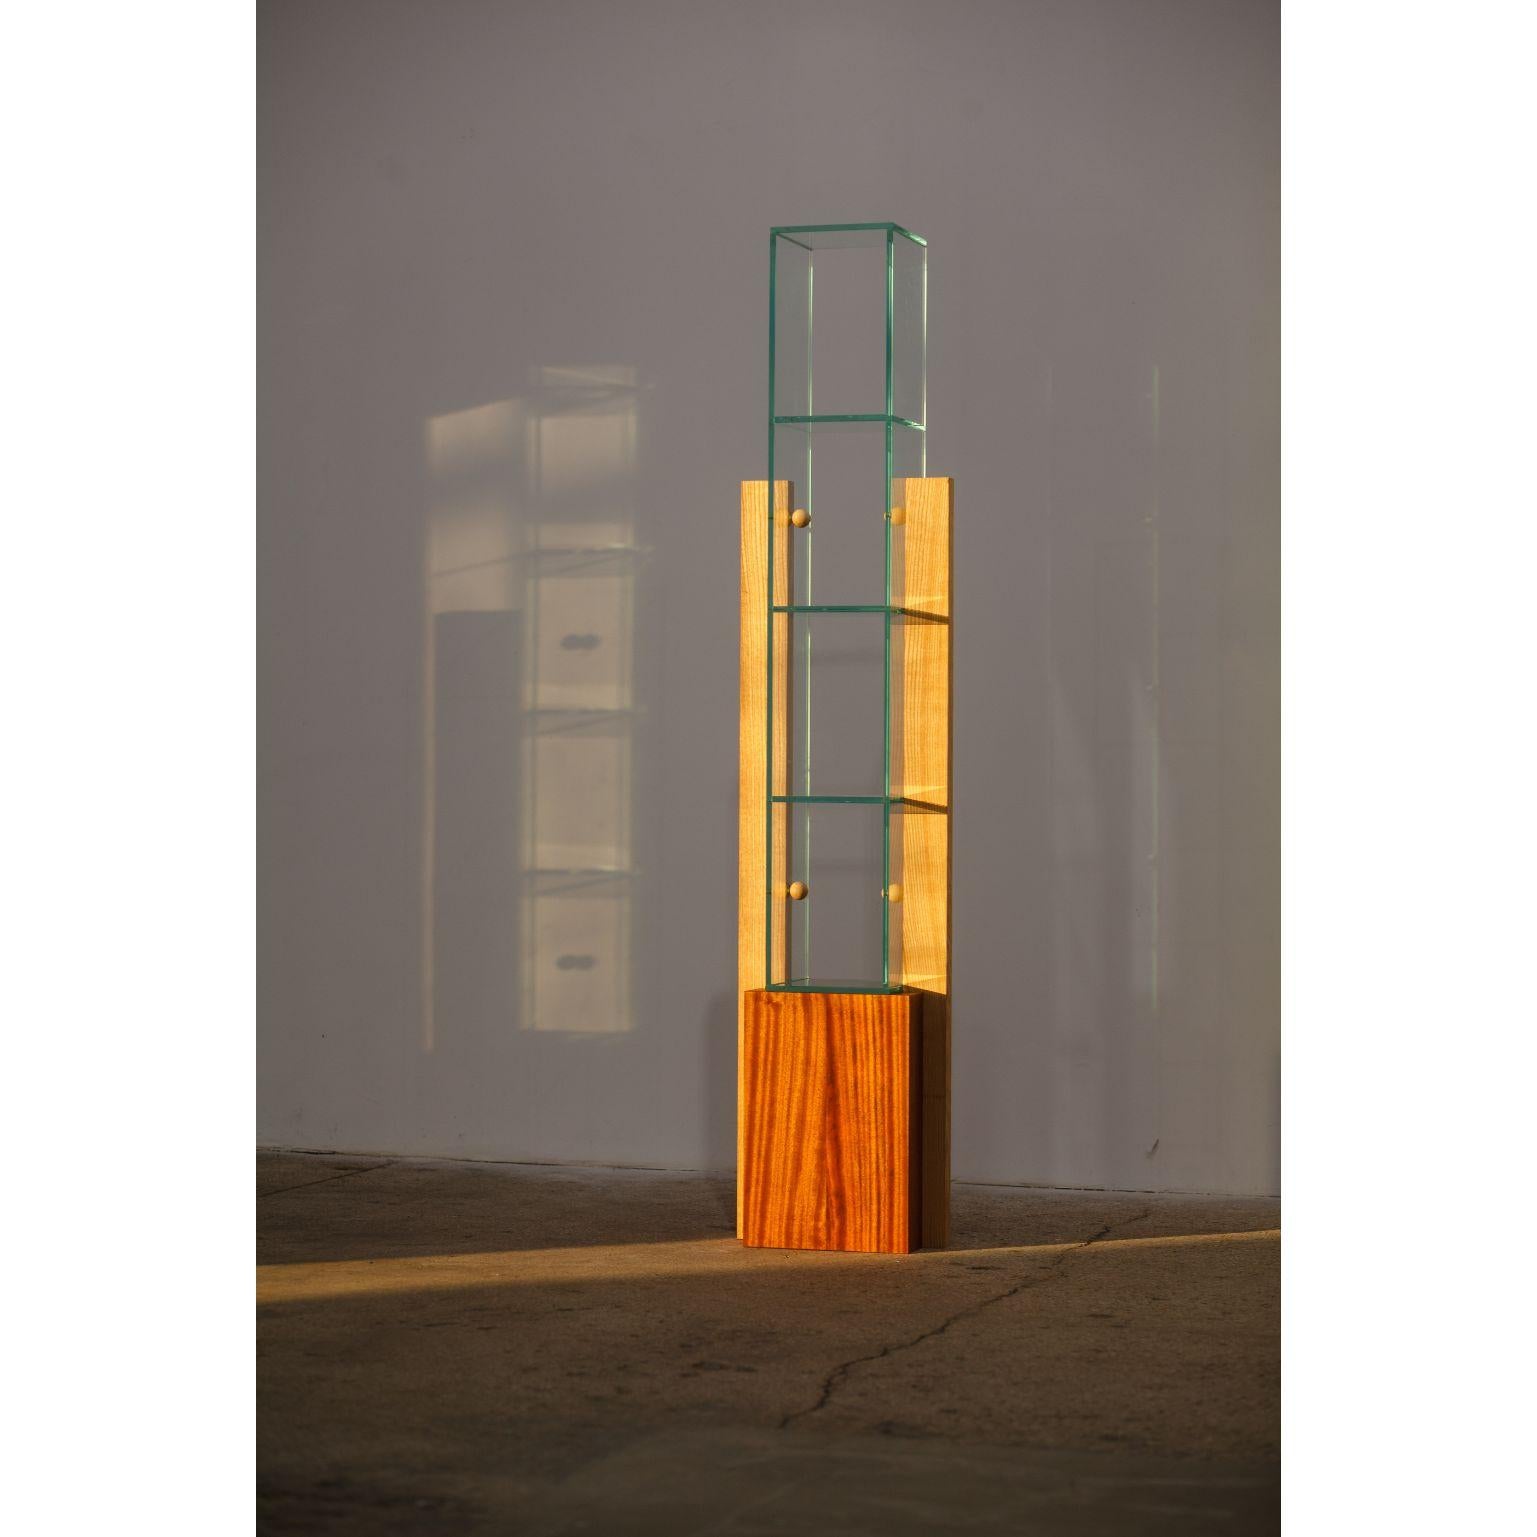 Form 1 by Radu Abraham
A limited series of 10, currently at nr. 2
Materials: Mahogany wood, ash wood, glass
Dimensions: 34 x 20 x 160 cm.

Base made out of a masive block of mahogany wood, ash sides and glass shelves with acces from both sides.